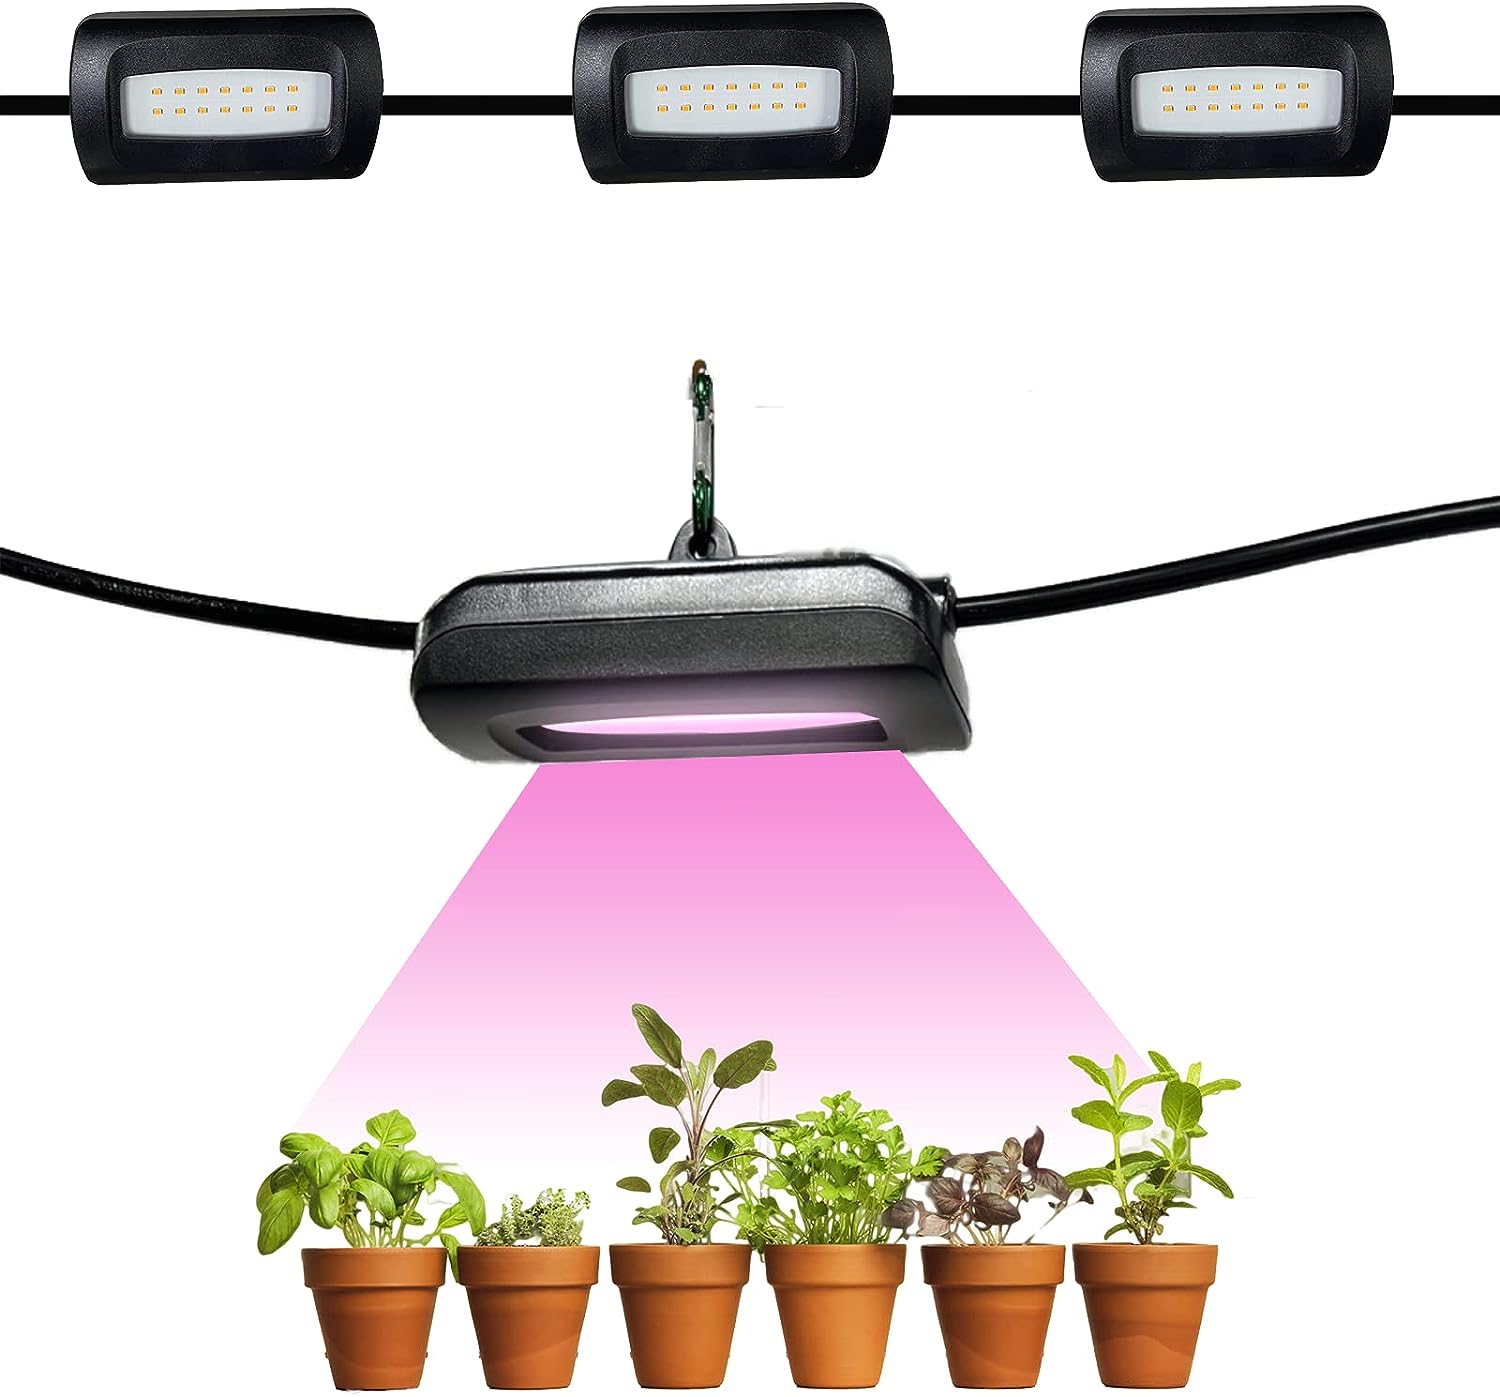 Owleye 12FT Outdoor Grow Lights Waterproof LED Plant Light for Greenhouse  Shady Areas, Full Spectrum Greenhouse Lighting for Seedling, Vegetables (3-Bulbs)